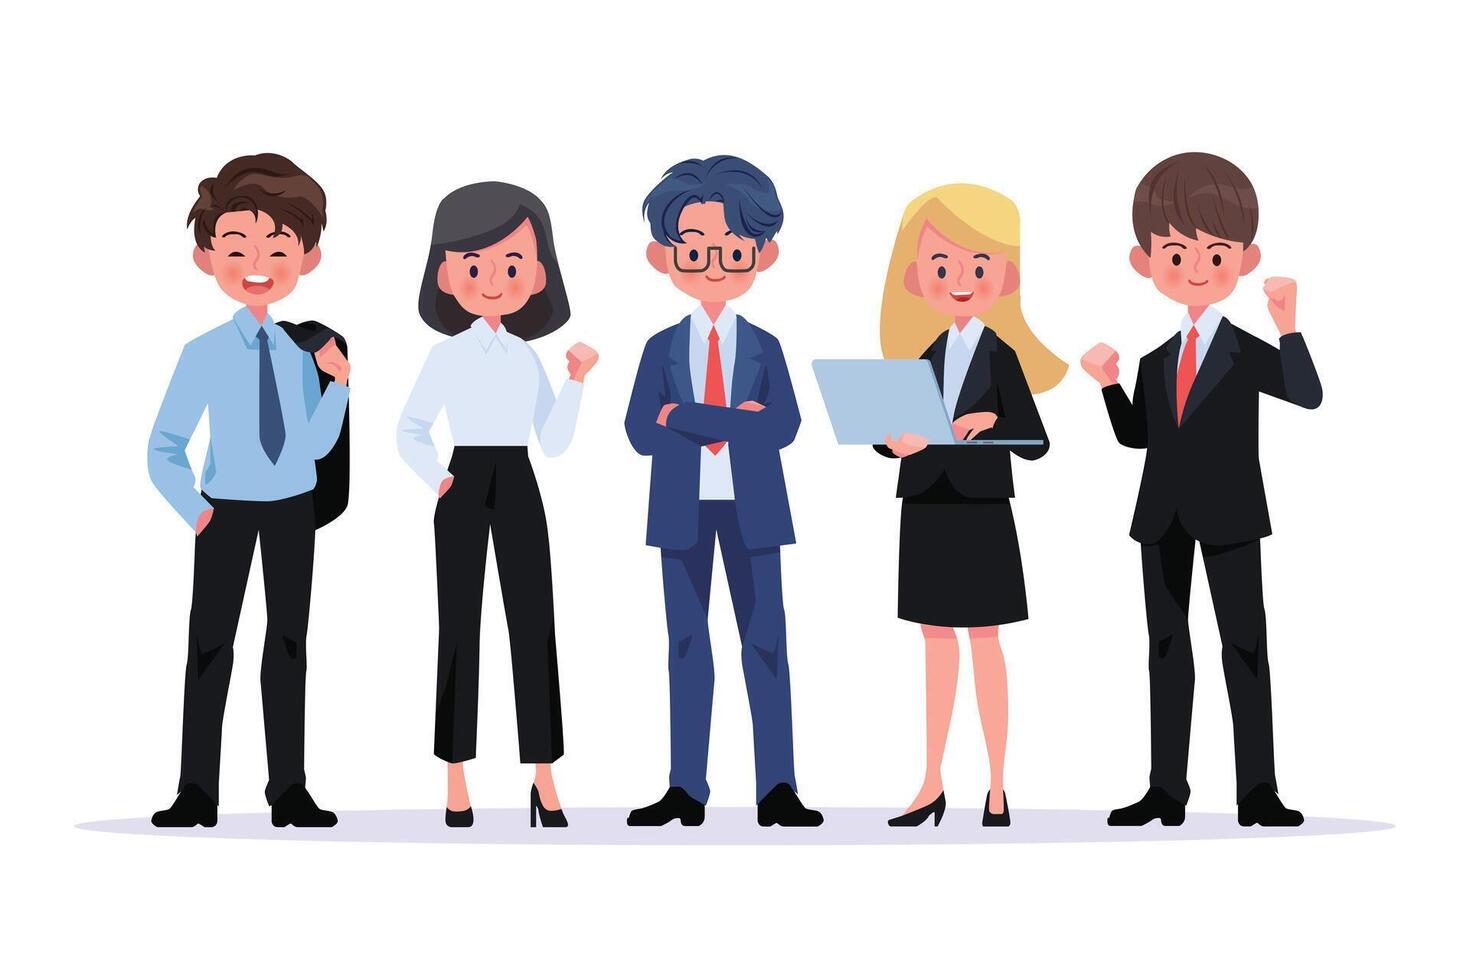 Group of business men and women, working people. Business team and teamwork concept. Flat design people characters. vector